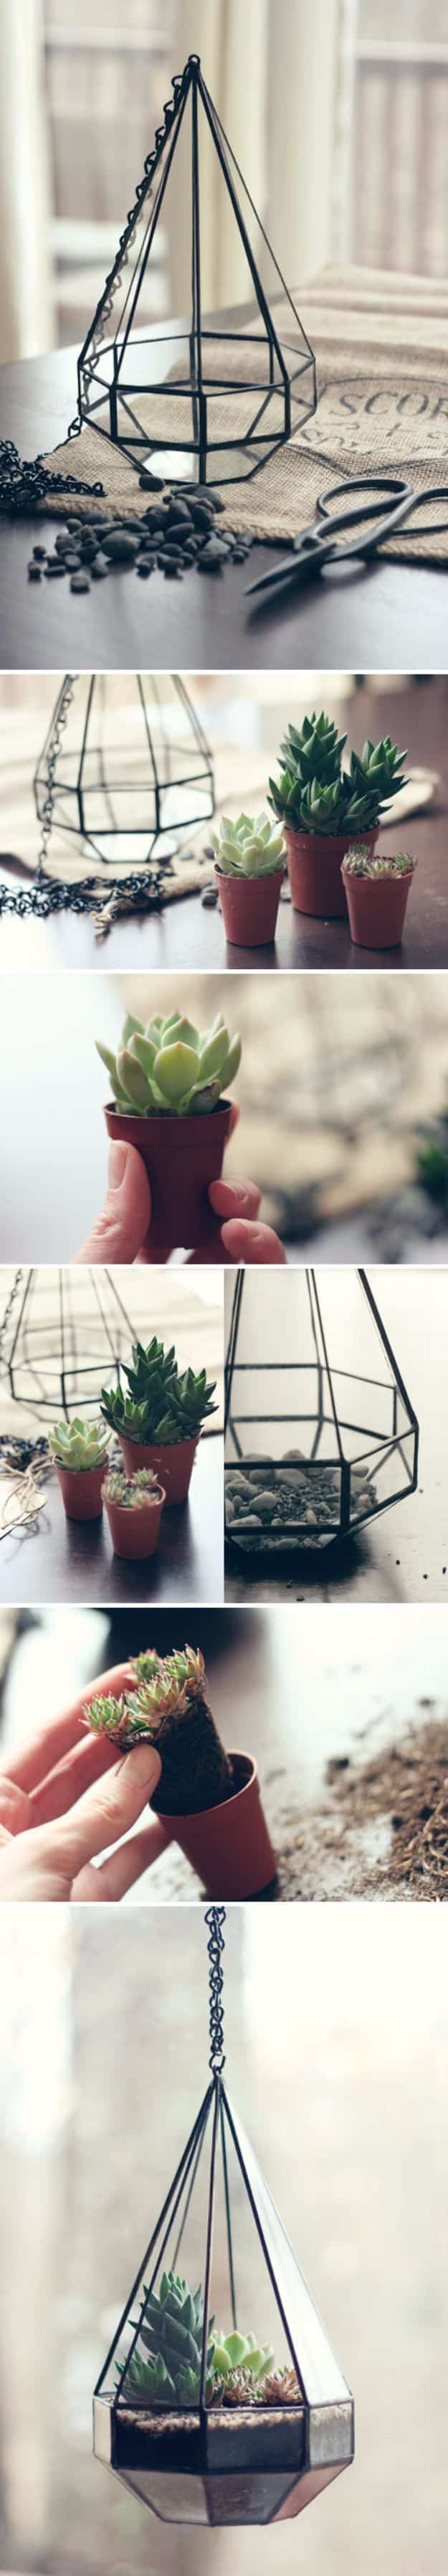 DIY Terrarium Ideas - Hanging Glass Terrarium - Cool Terrariums and Crafts With Mason Jars, Succulents, Wood, Geometric Designs and Reptile, Acquarium - Easy DIY Terrariums for Adults and Kids To Make at Home 